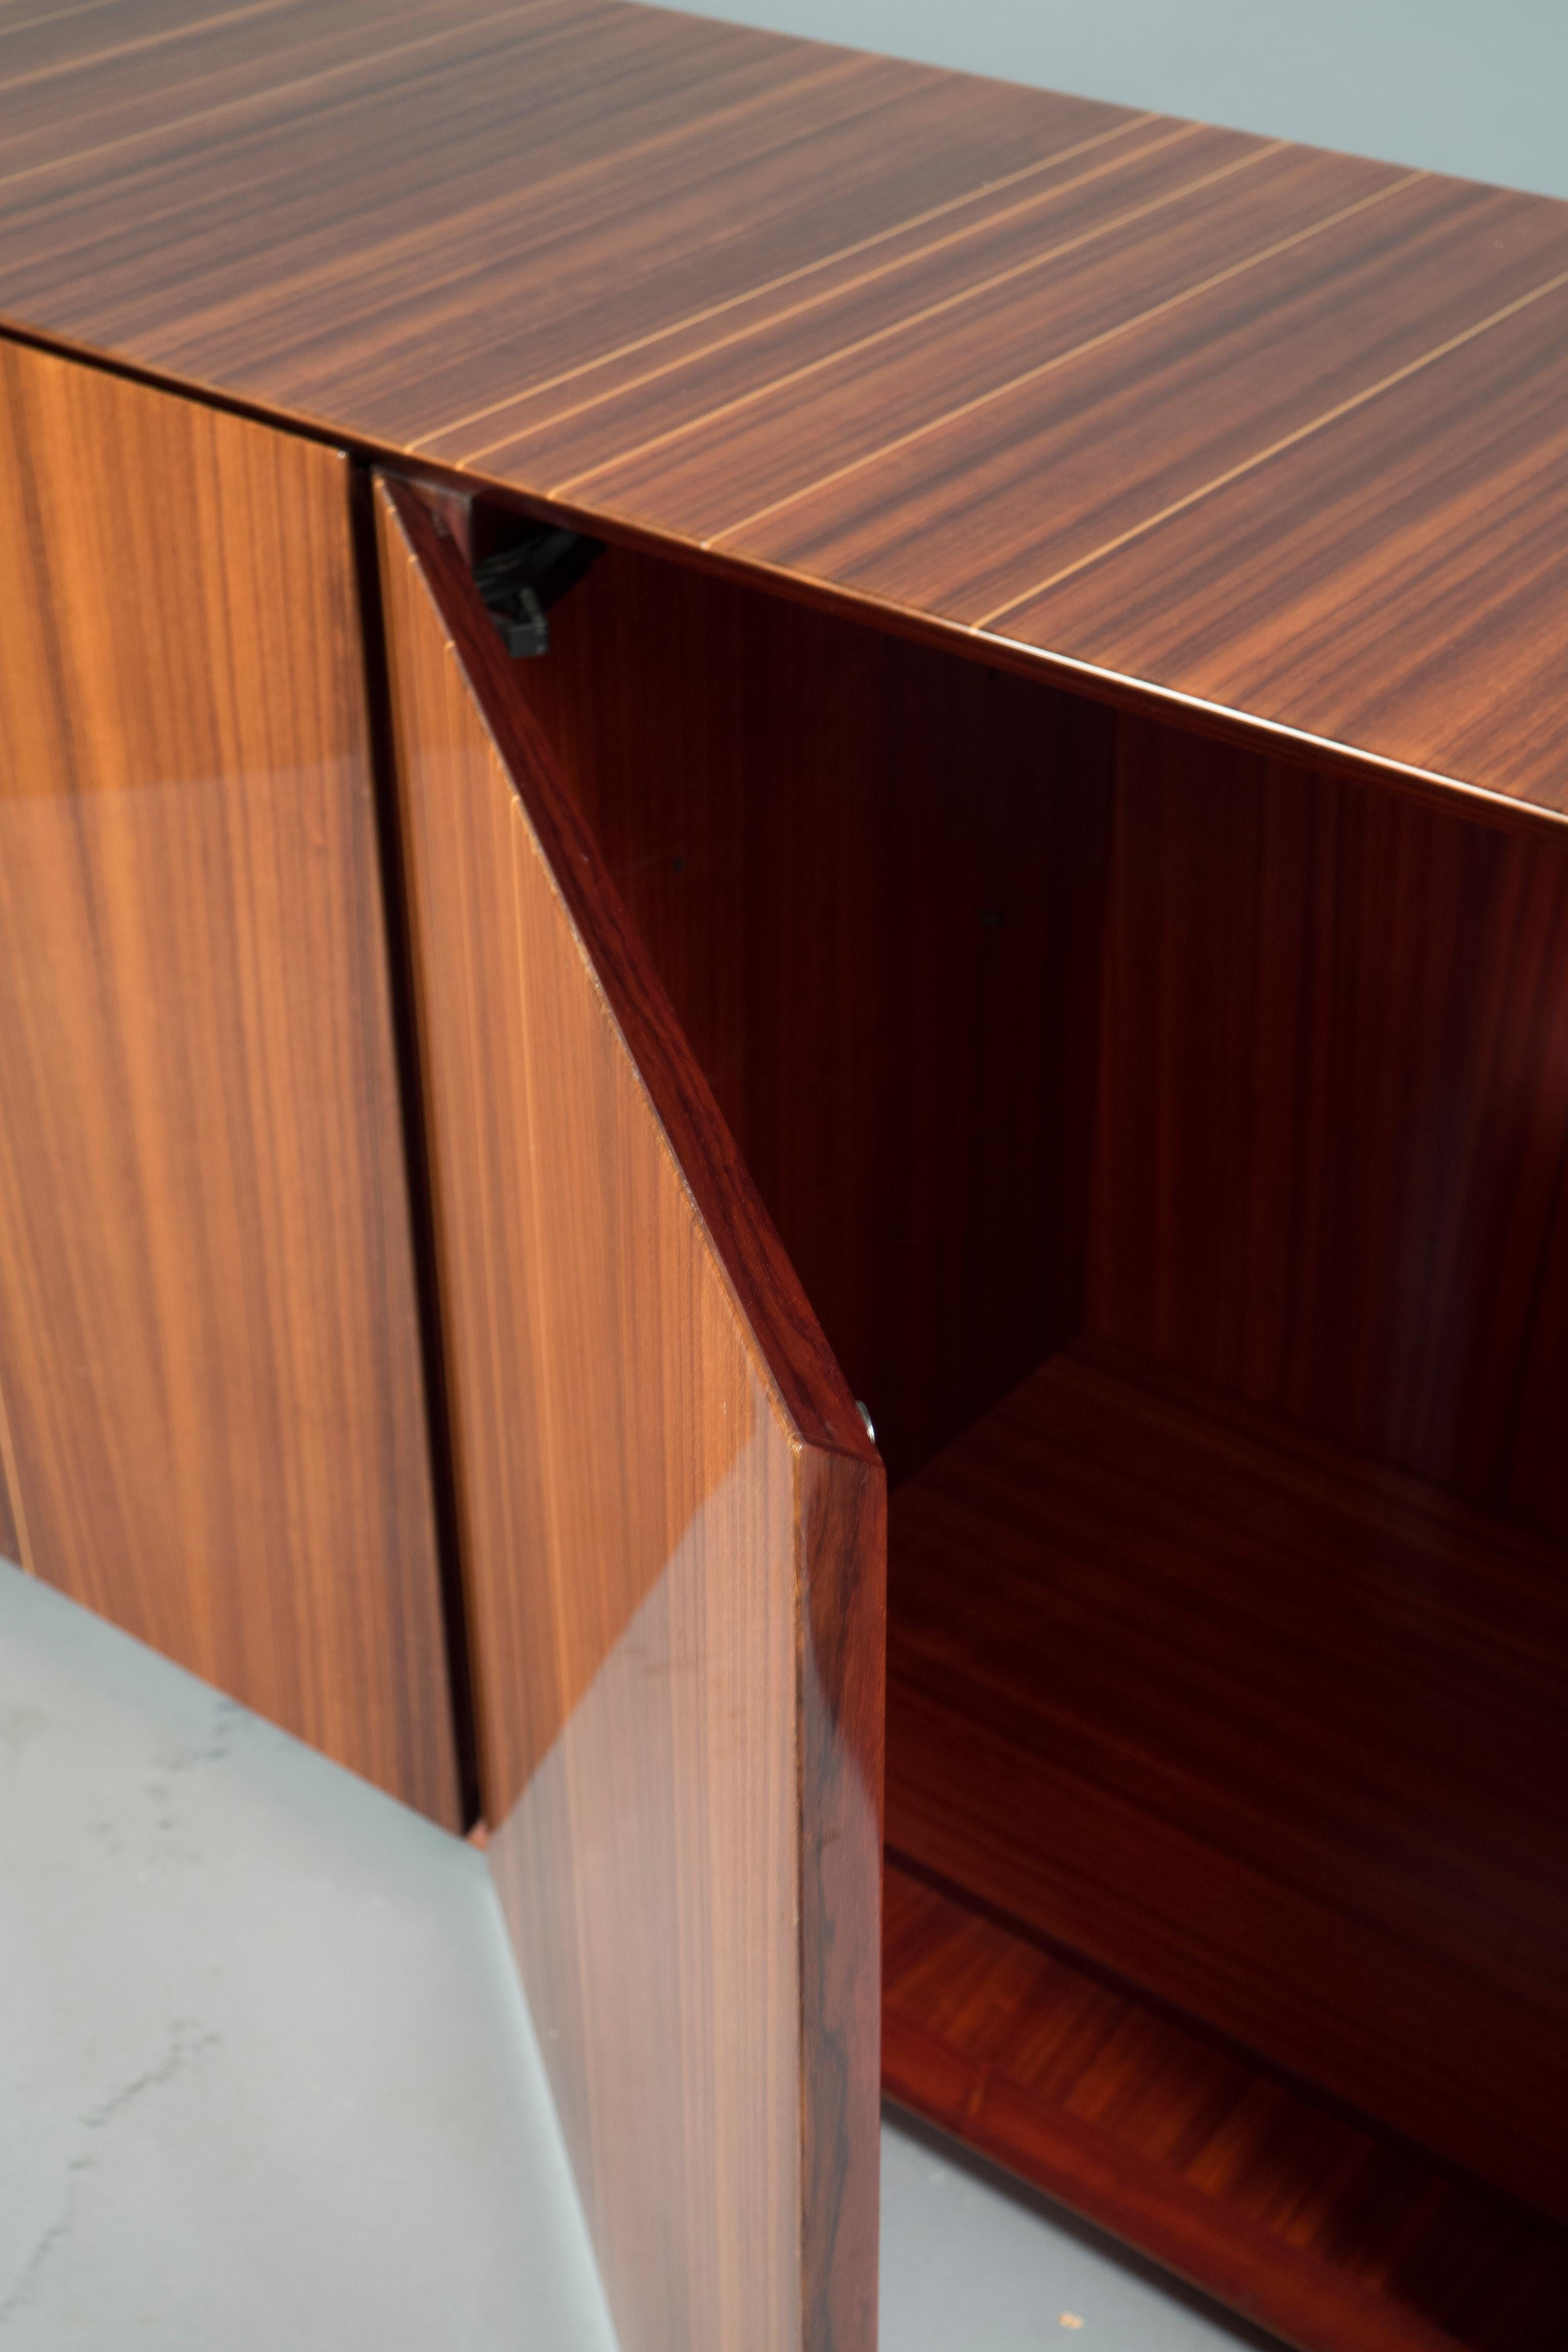 Walnut veneered sideboard with partial sycamore inlay, the interior features one shelf per section.
 